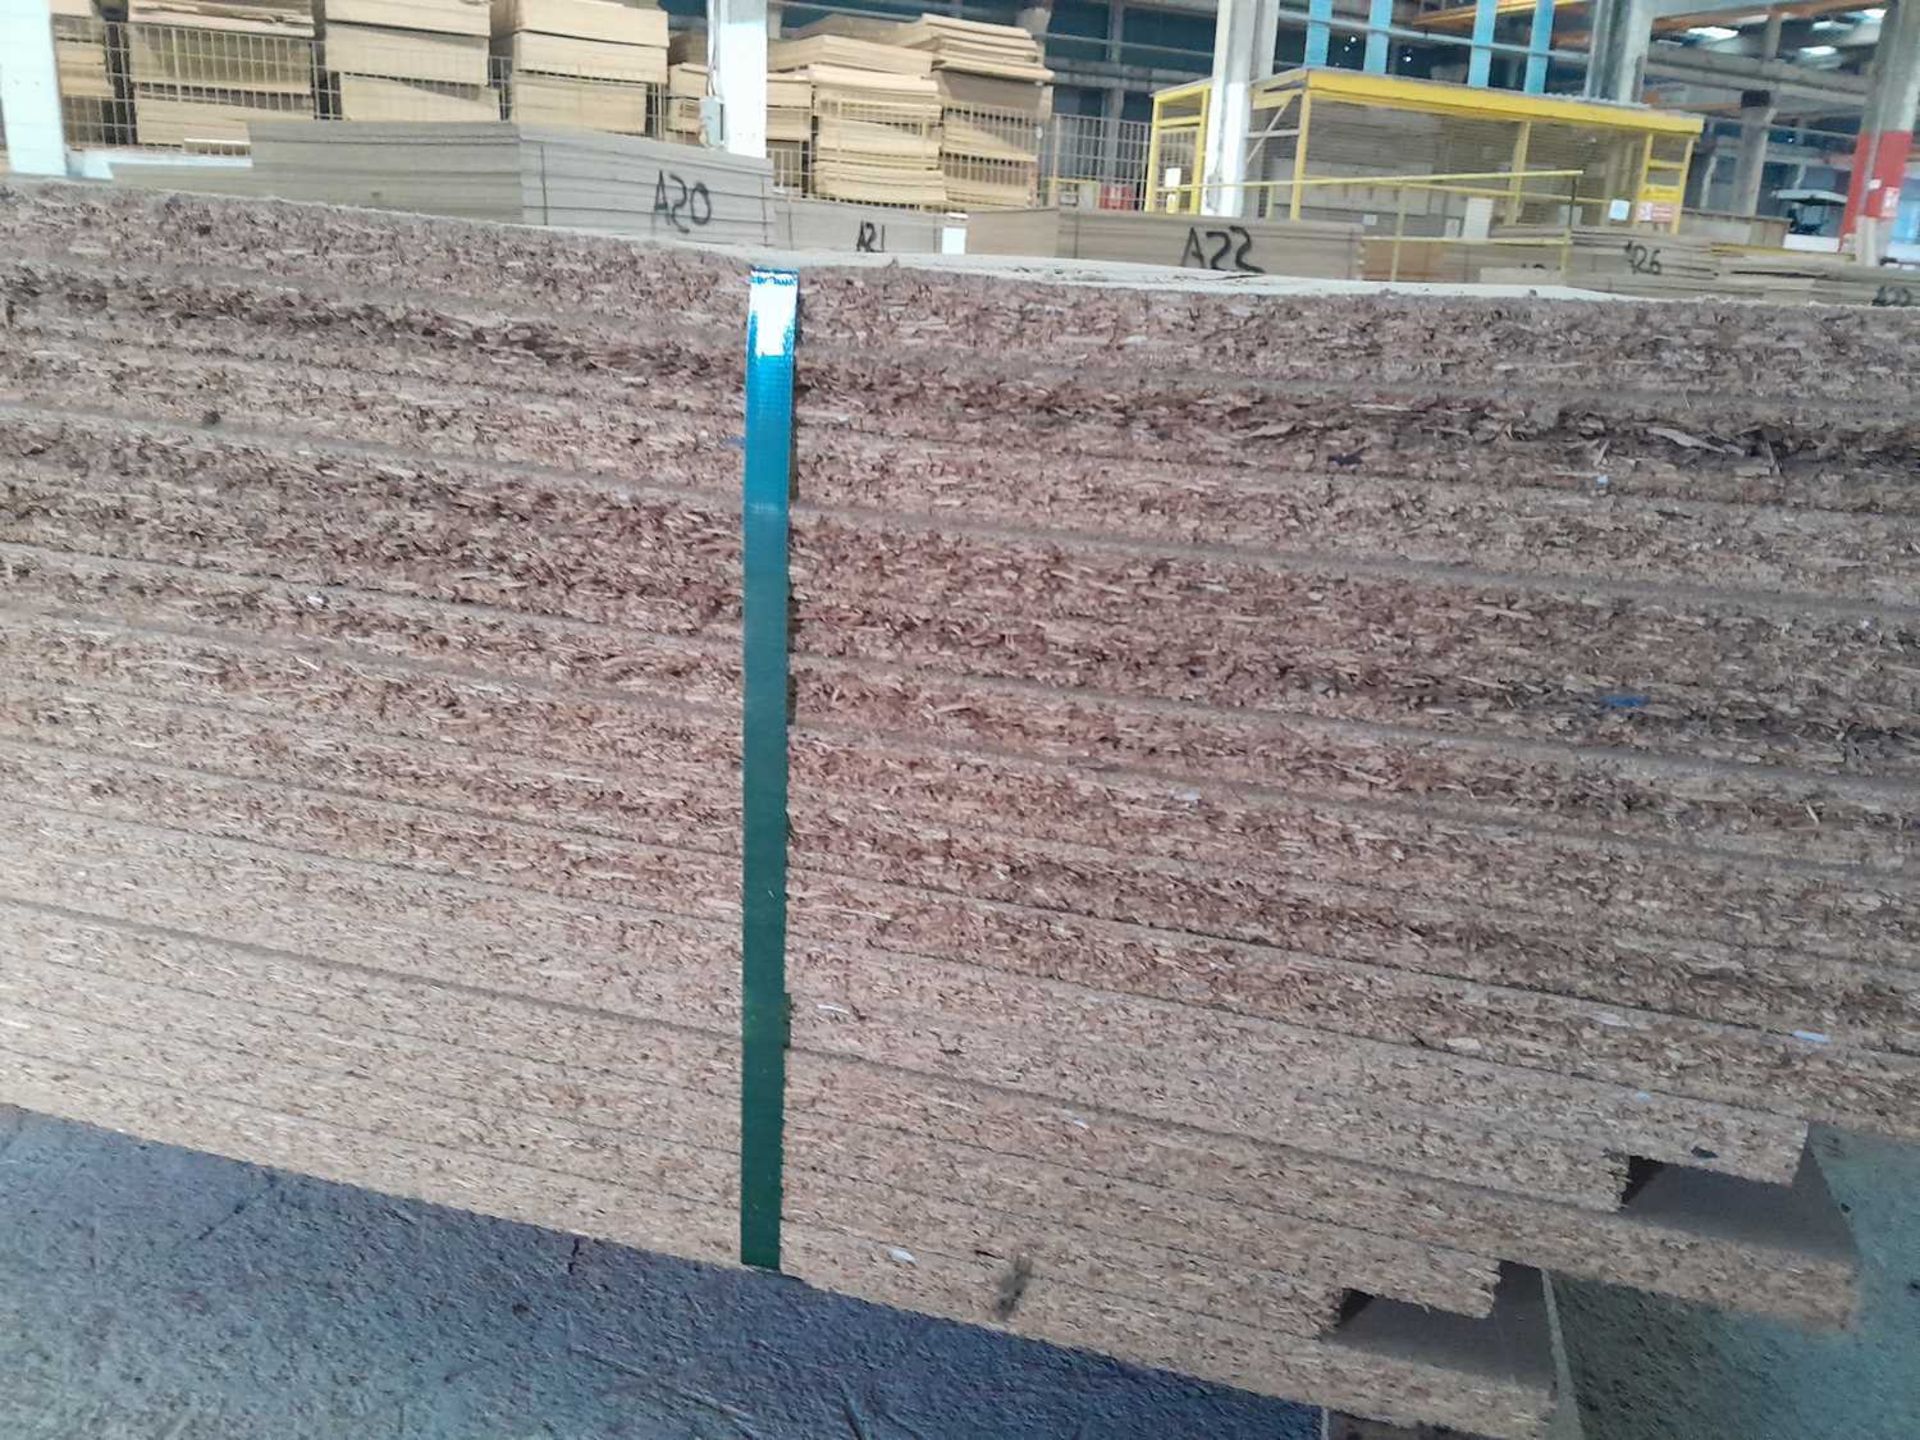 Selection of Chip Board Sheets (243cm x 189cm x 25mm - 16 of) - Image 3 of 3